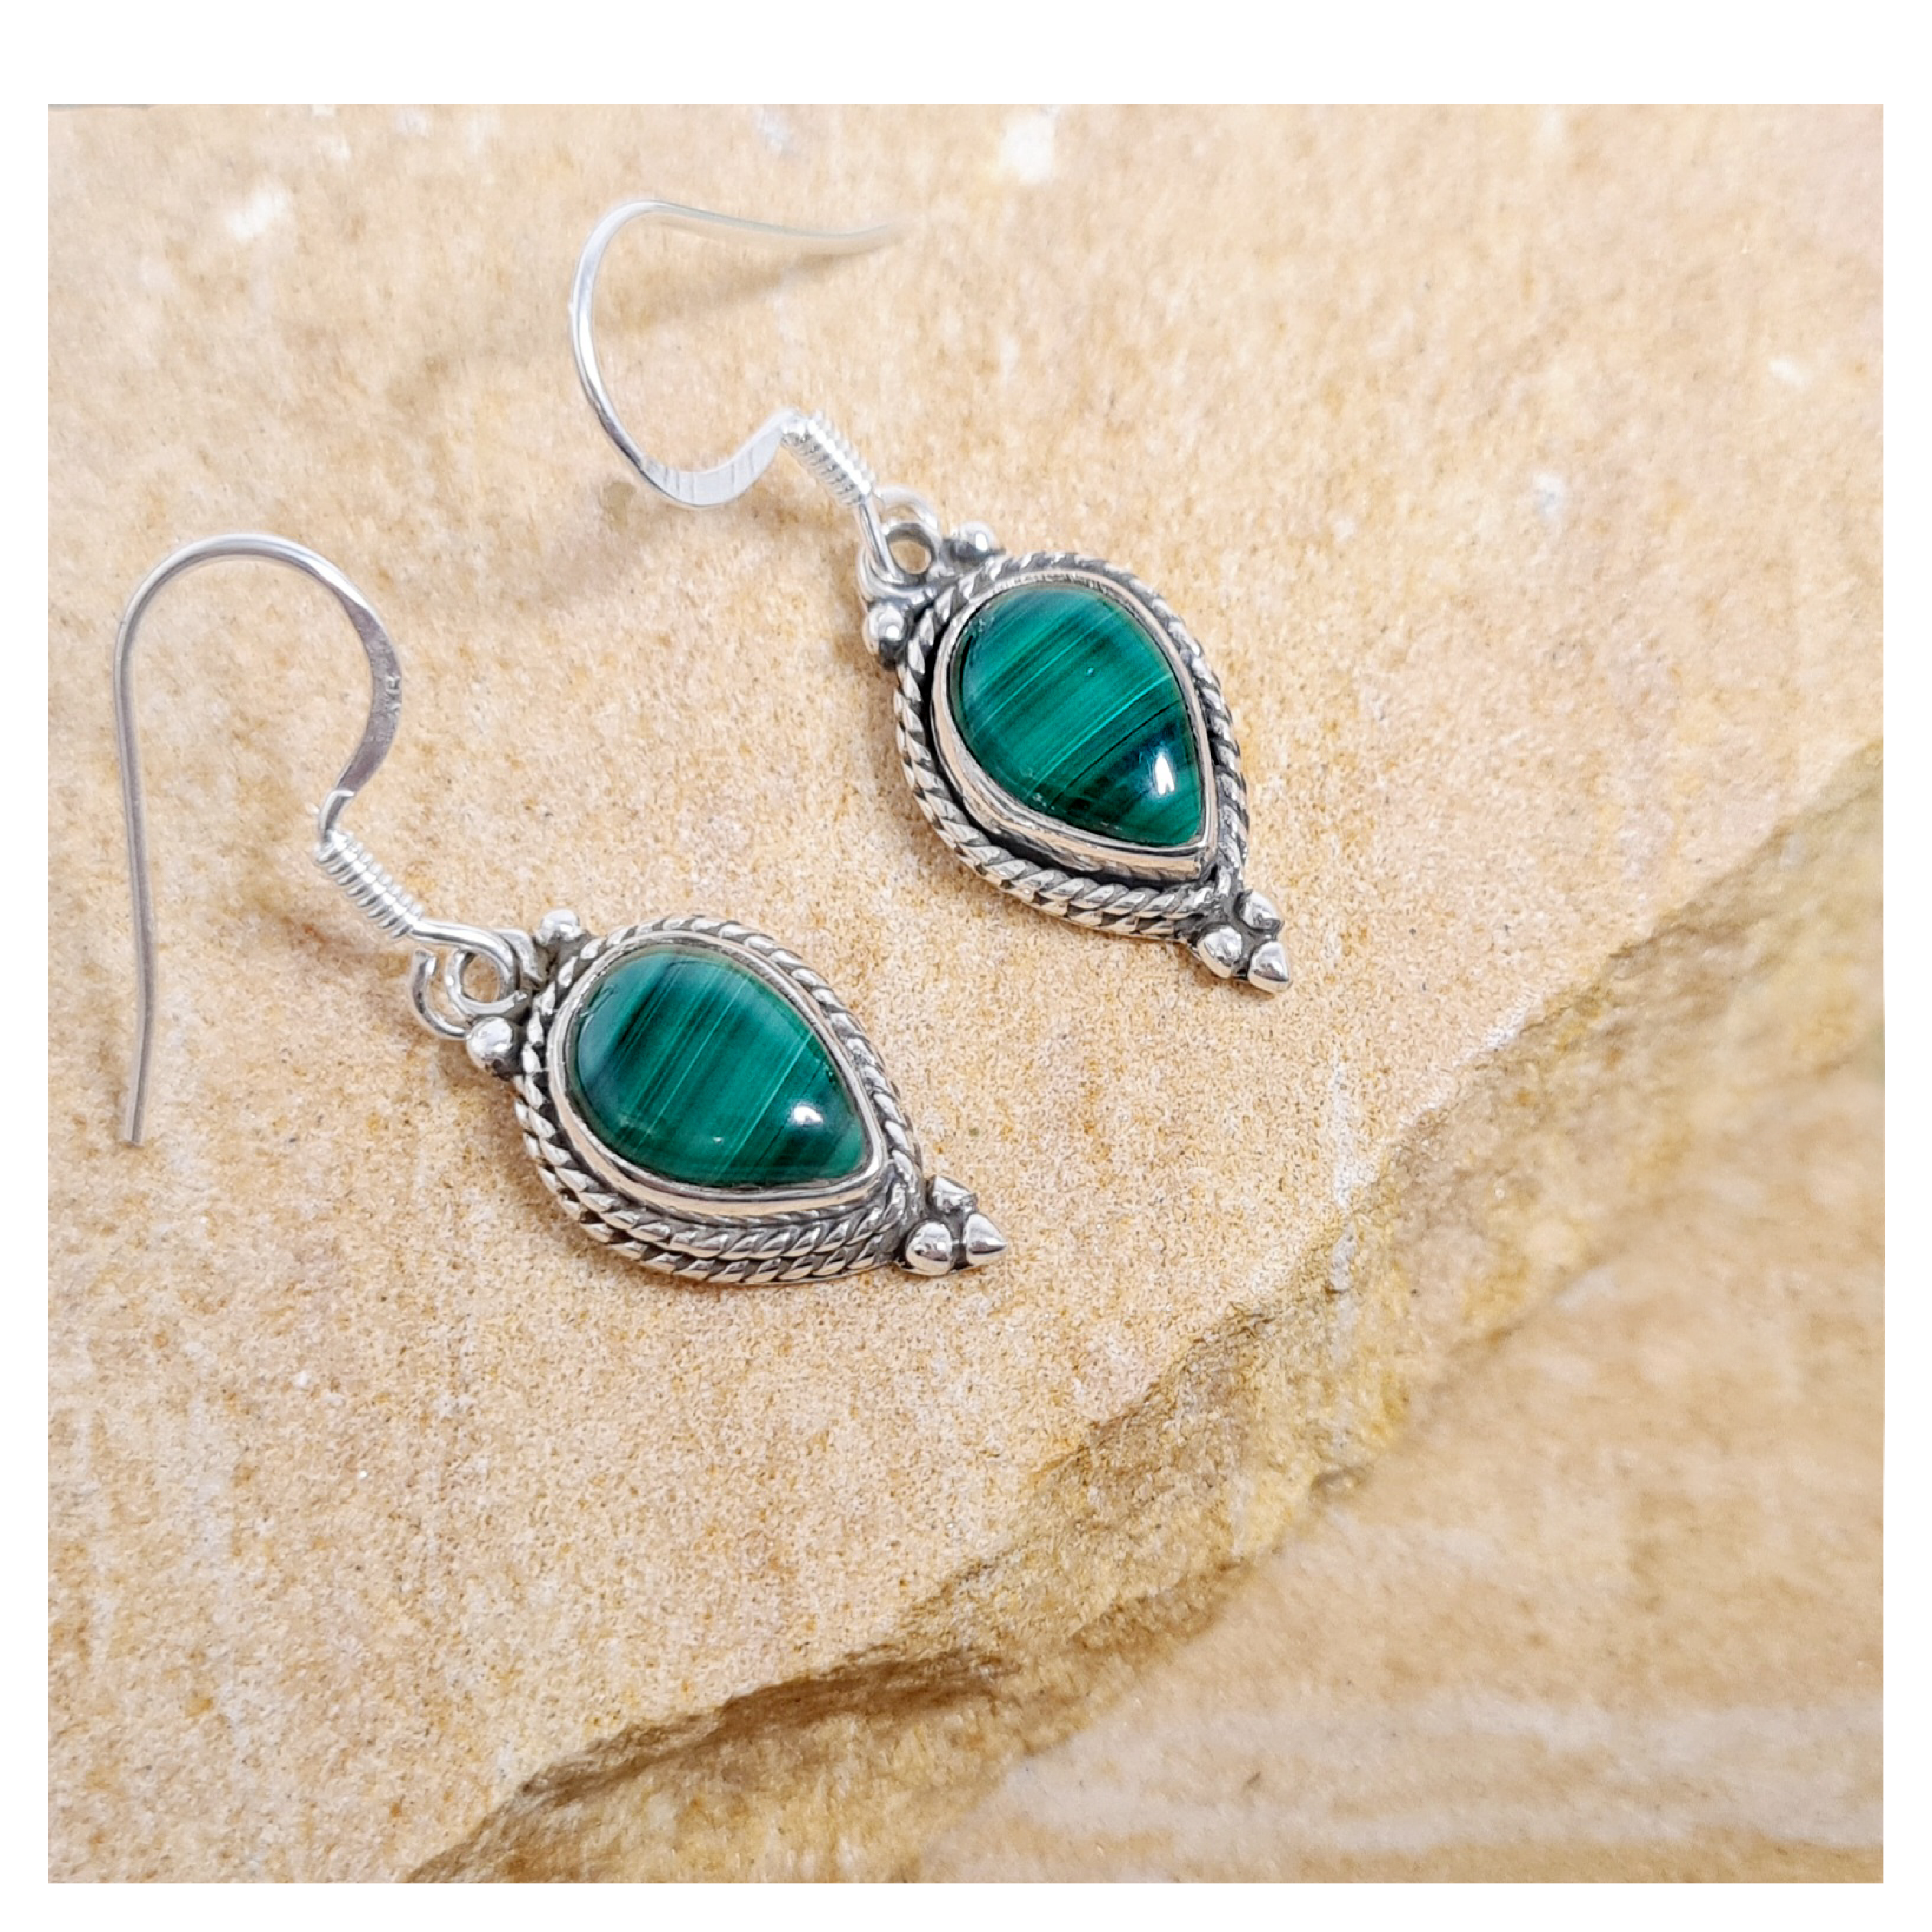 Malachite drop earrings with sterling silver detailing